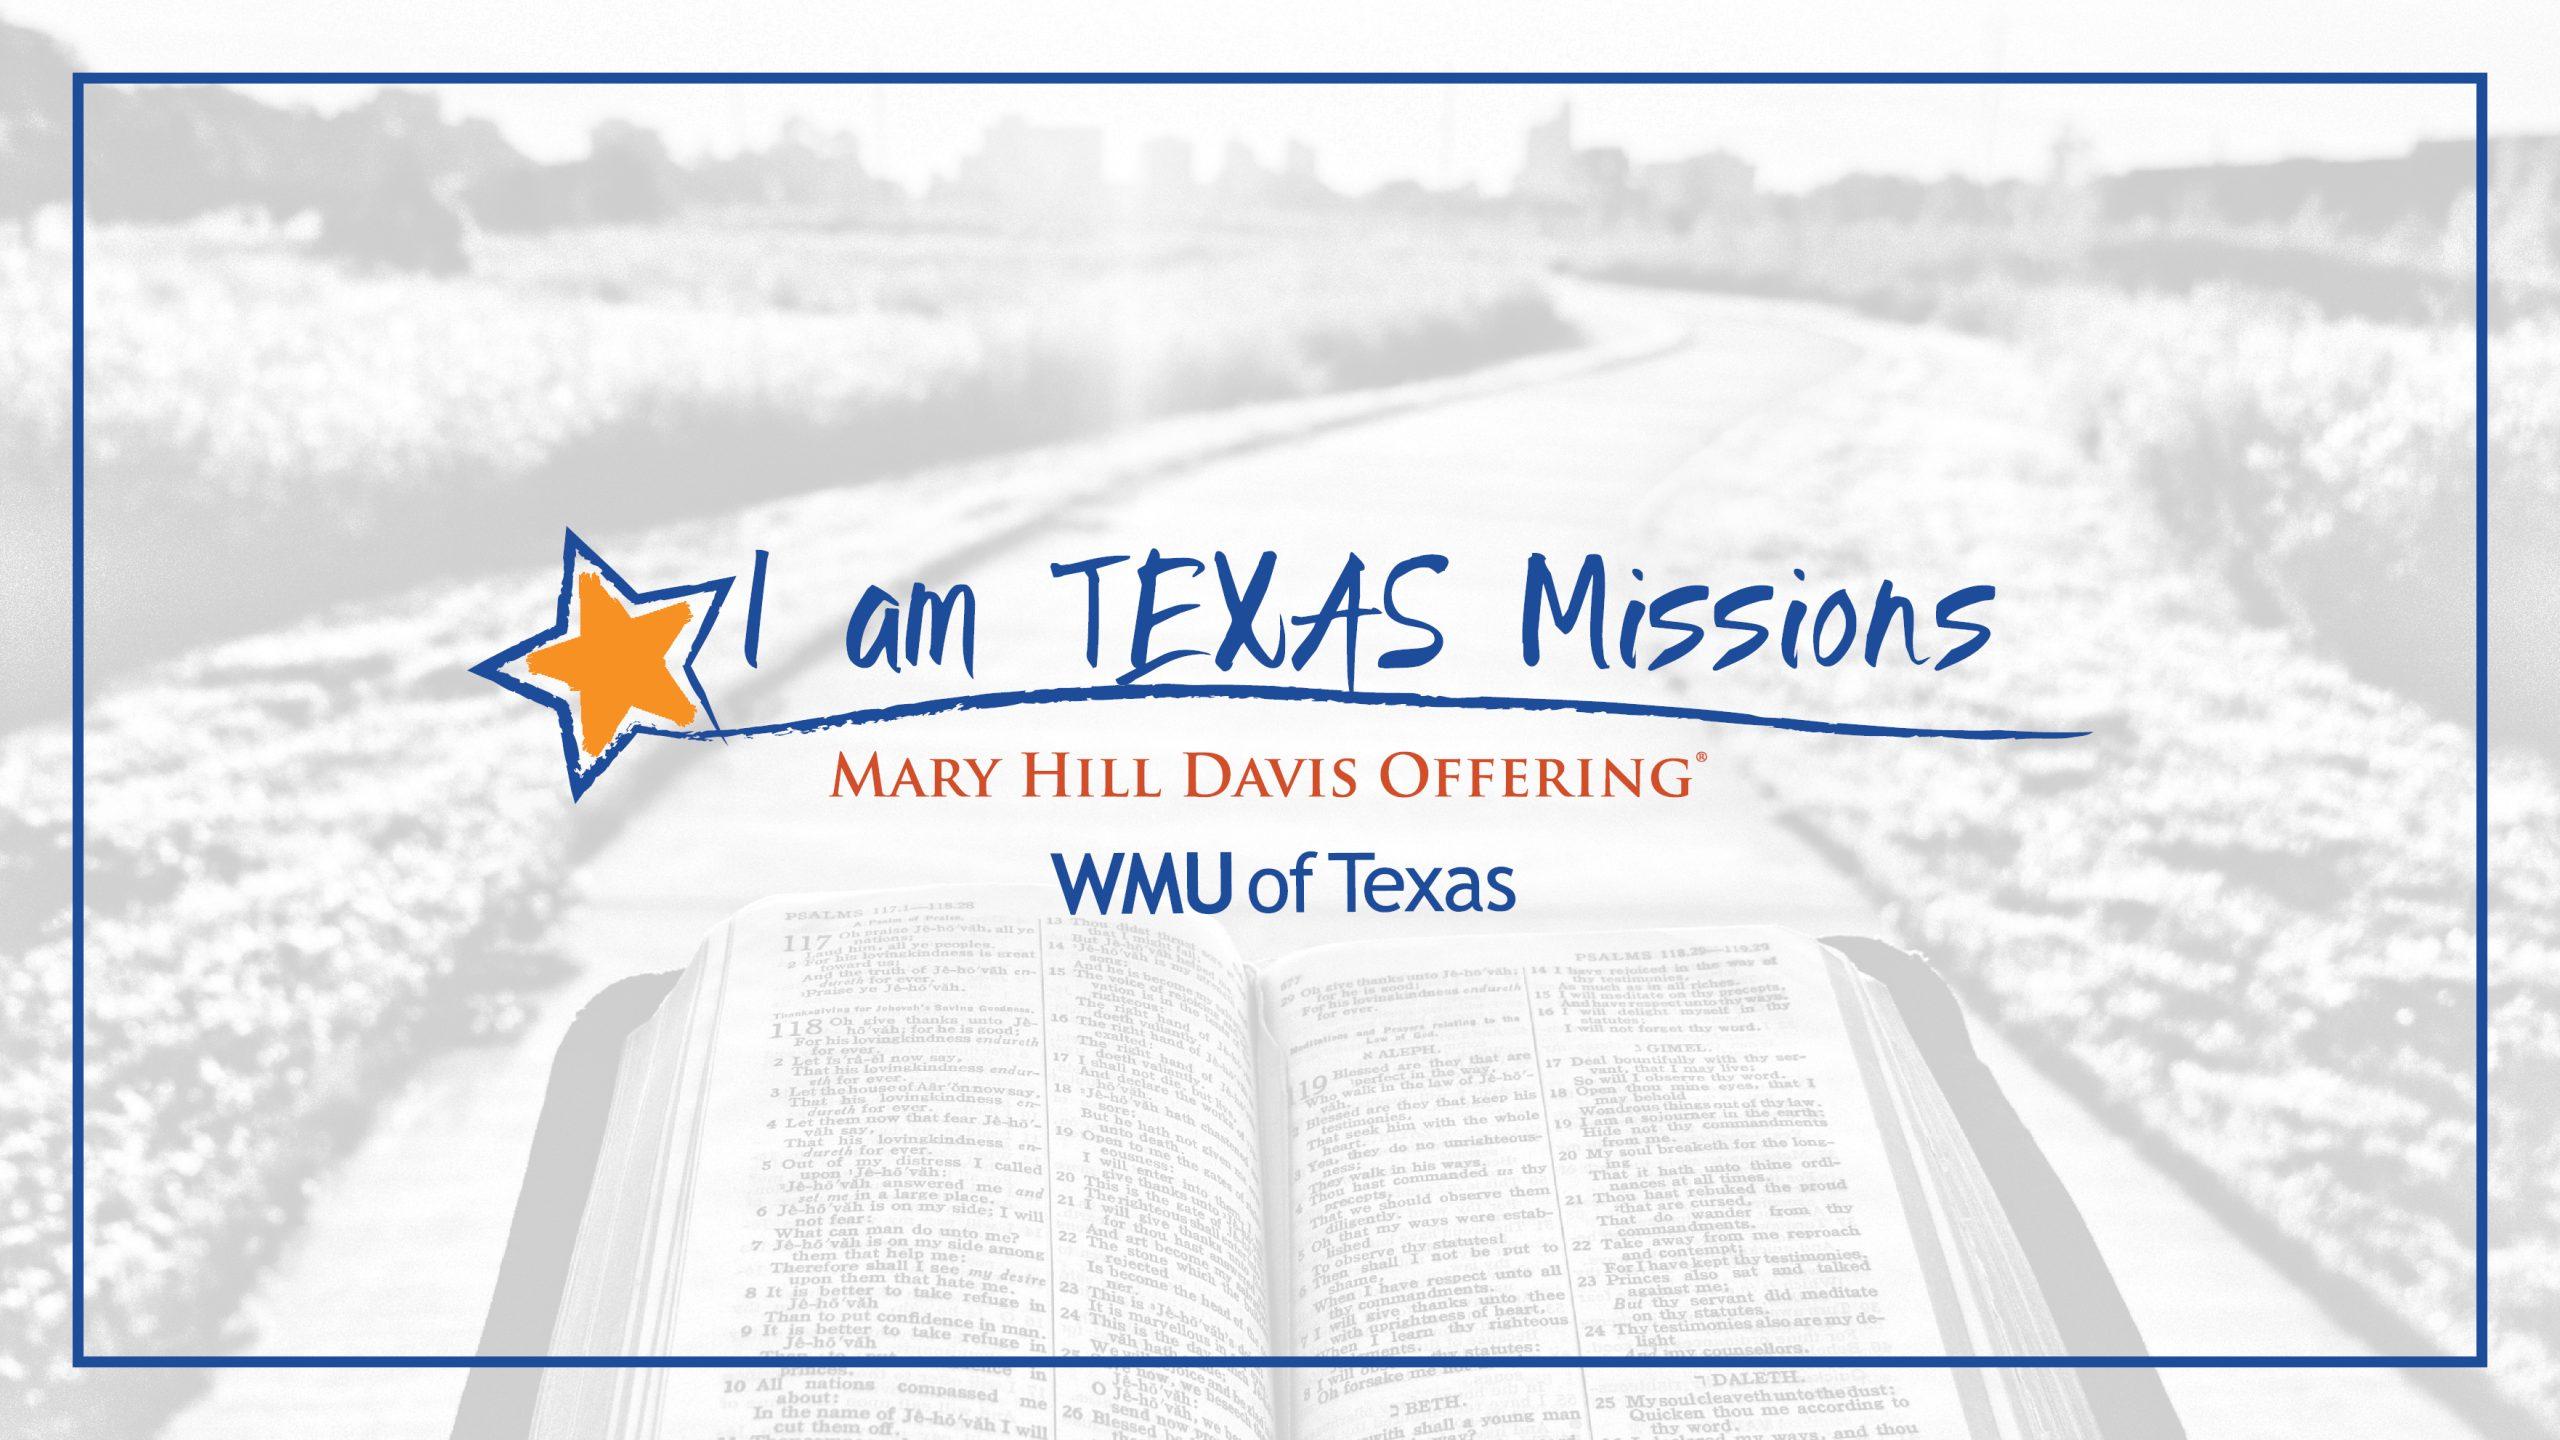 Mary Hill Davis offering for Texas Missions